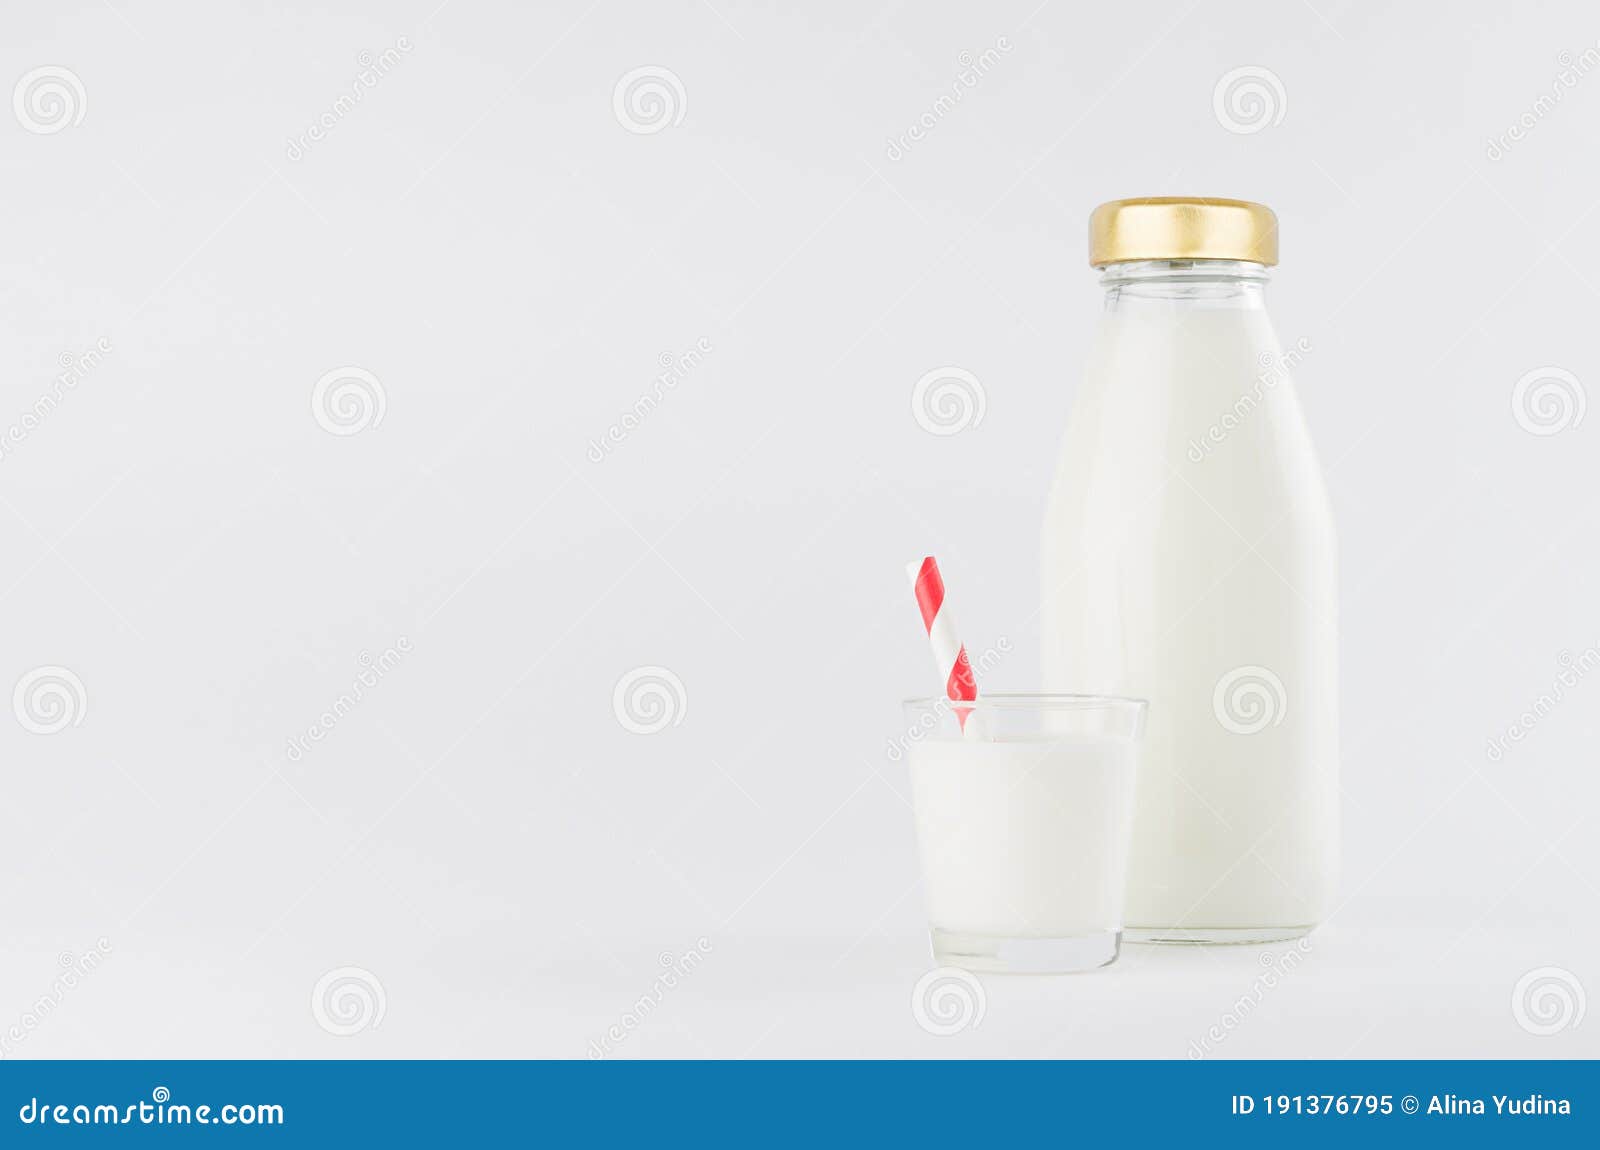 https://thumbs.dreamstime.com/z/white-milk-dairy-product-glass-bottle-mock-up-red-straped-straw-soft-light-background-191376795.jpg